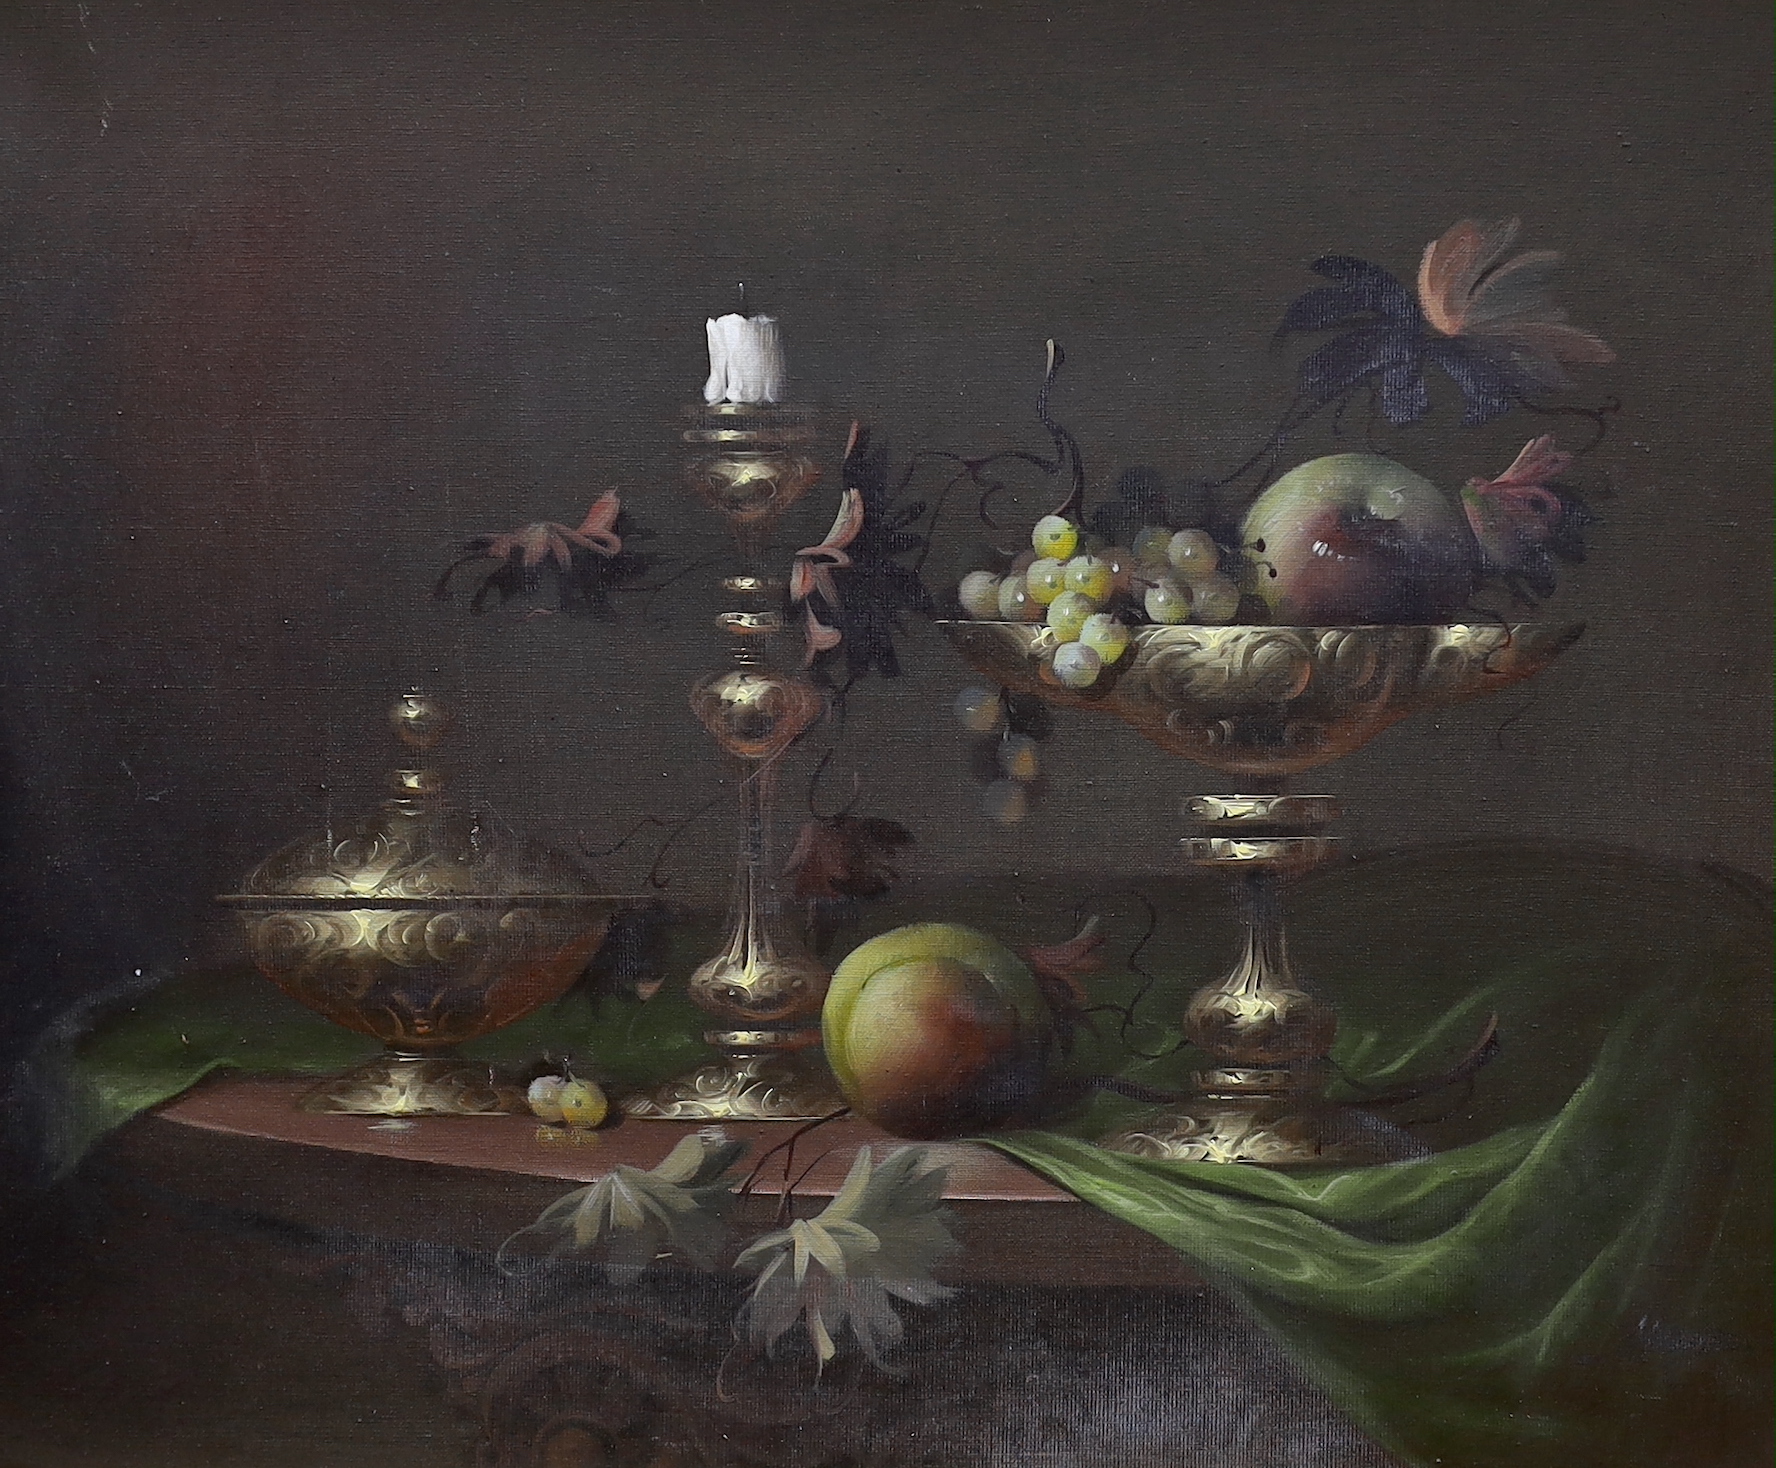 József Molnár (Hungarian, b.1939), oil on canvas, Still life of fruit and vessels, 60 x 49cm